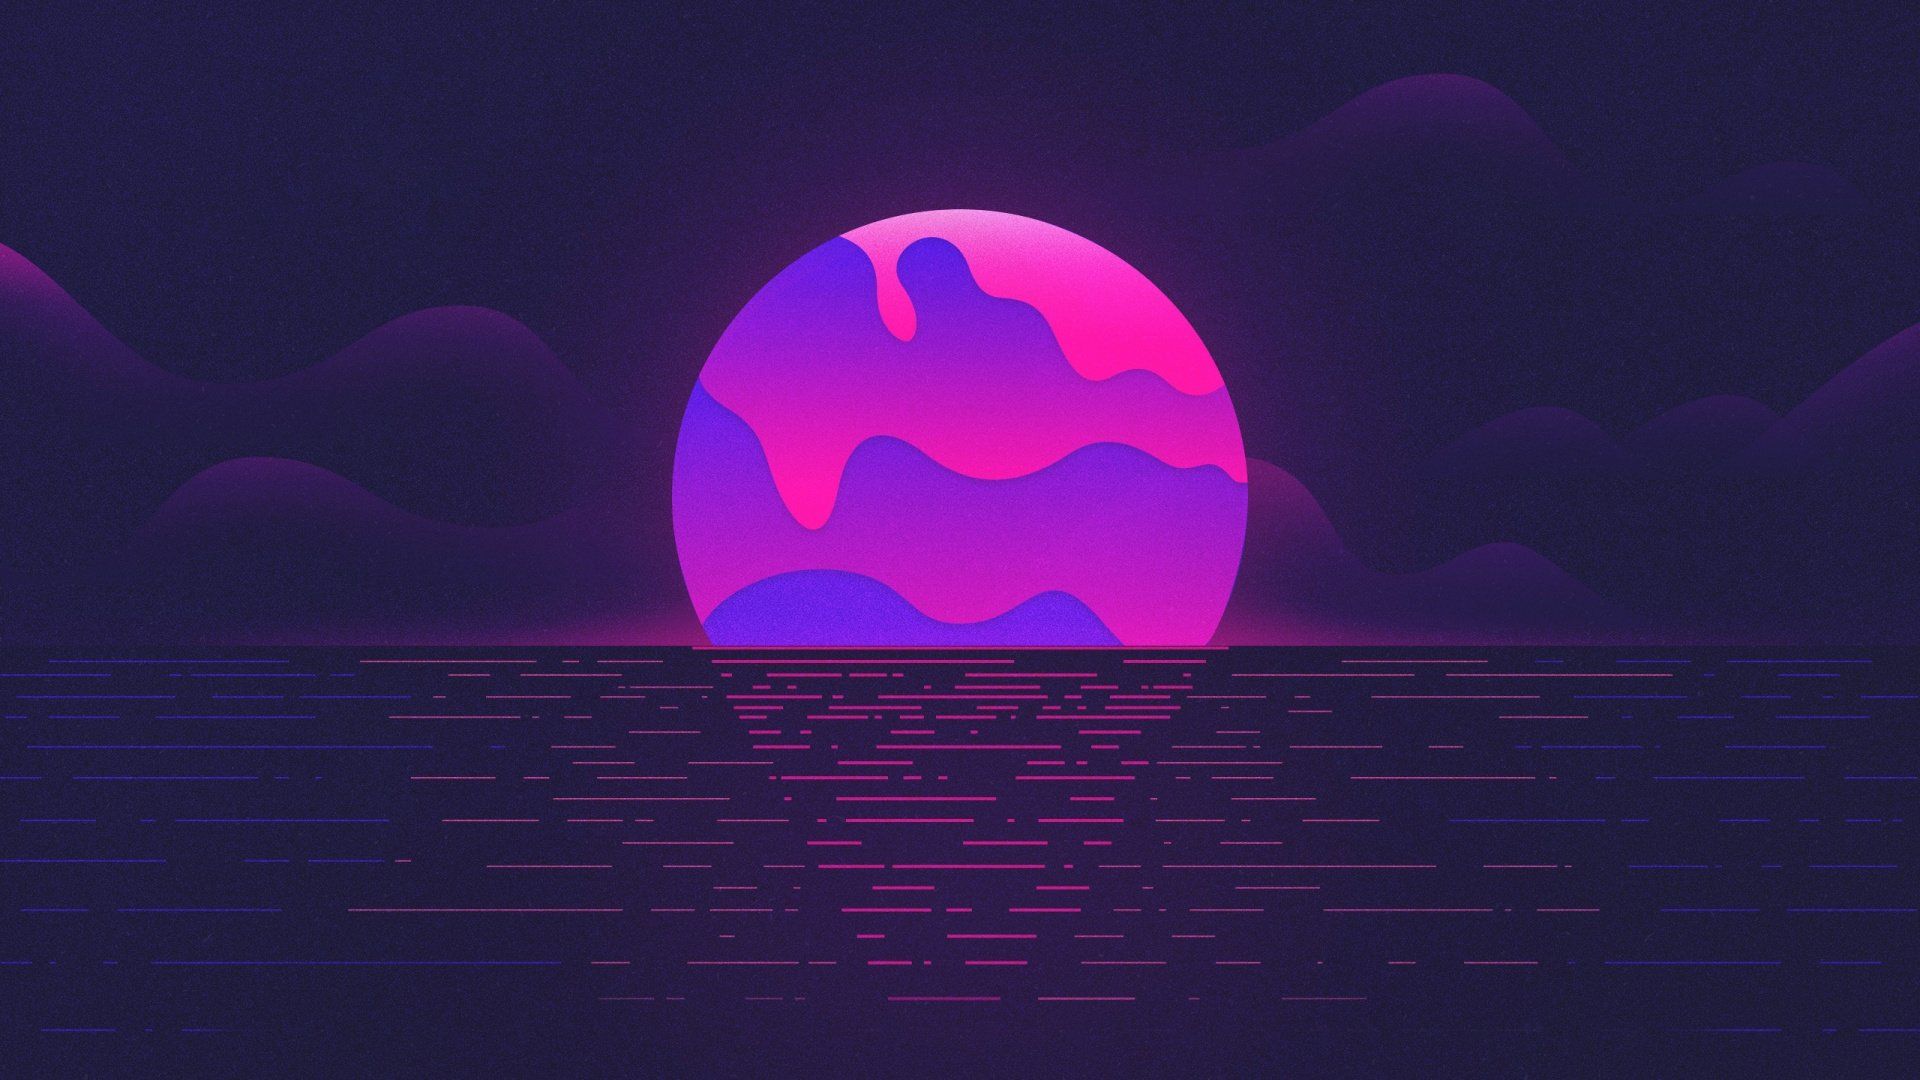 Purple Aesthetic 1920x1080 Wallpapers Wallpaper Cave